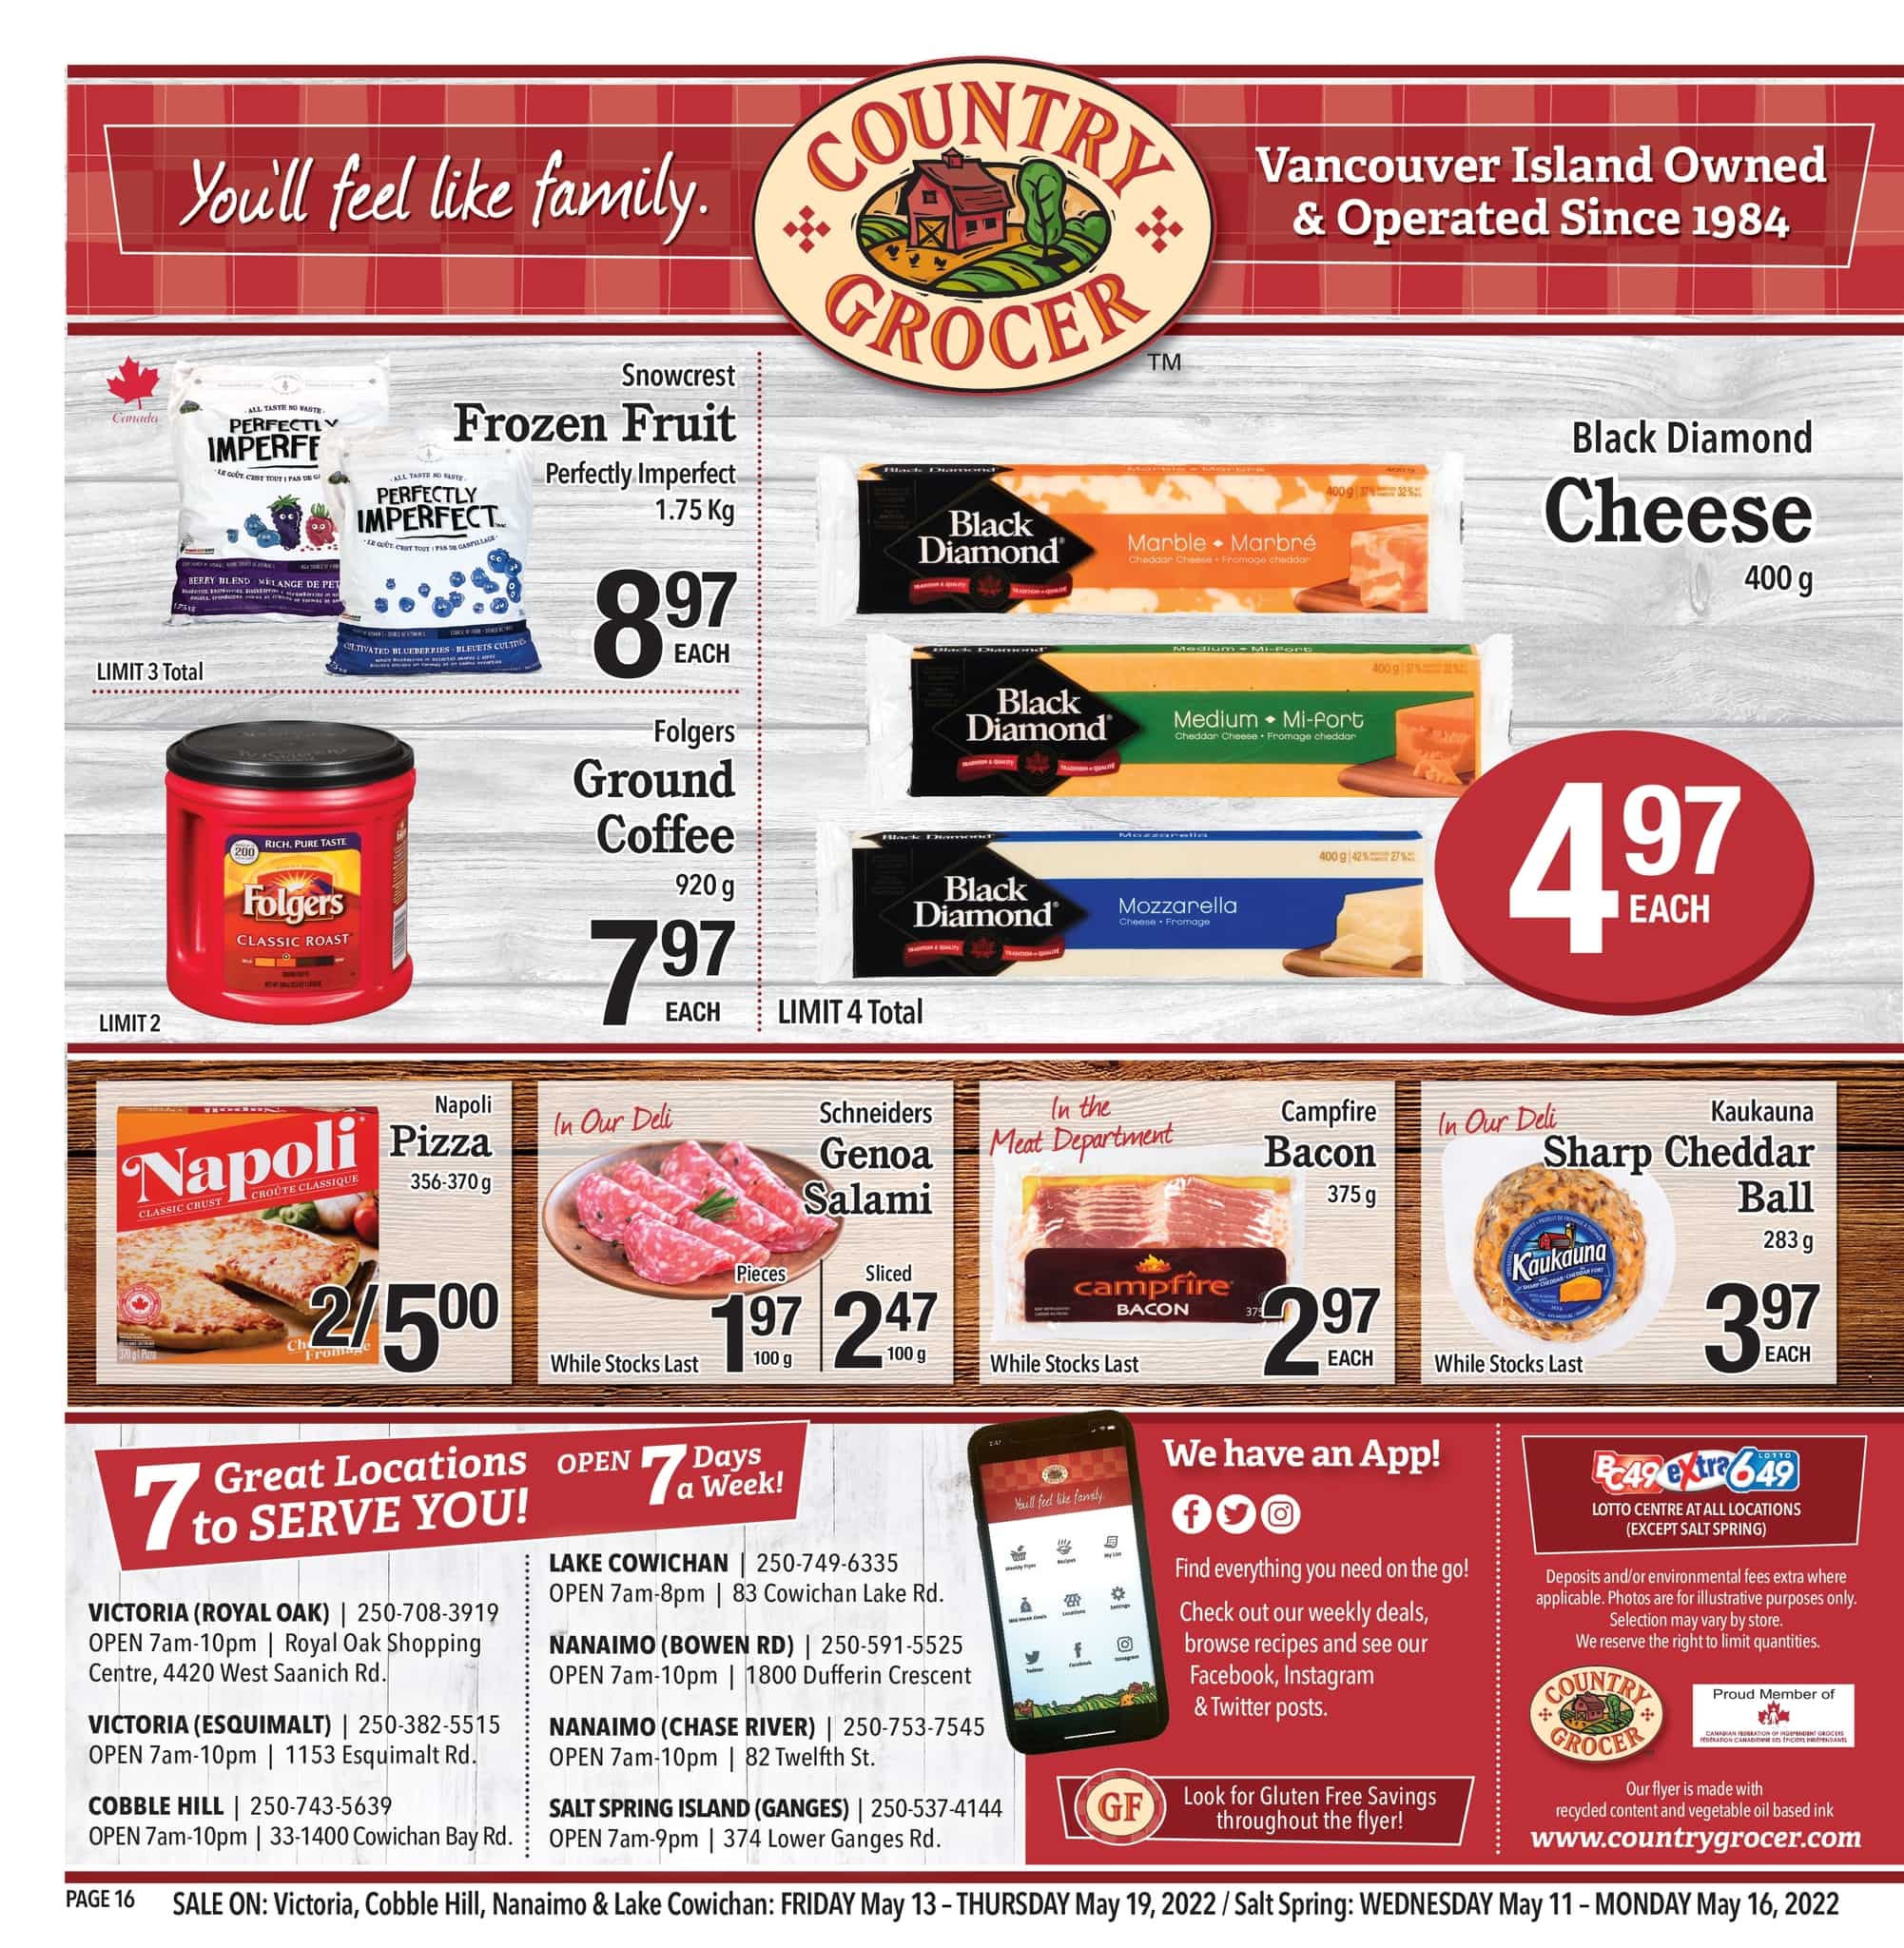 Country Grocer - Weekly Flyer Specials - Page 16